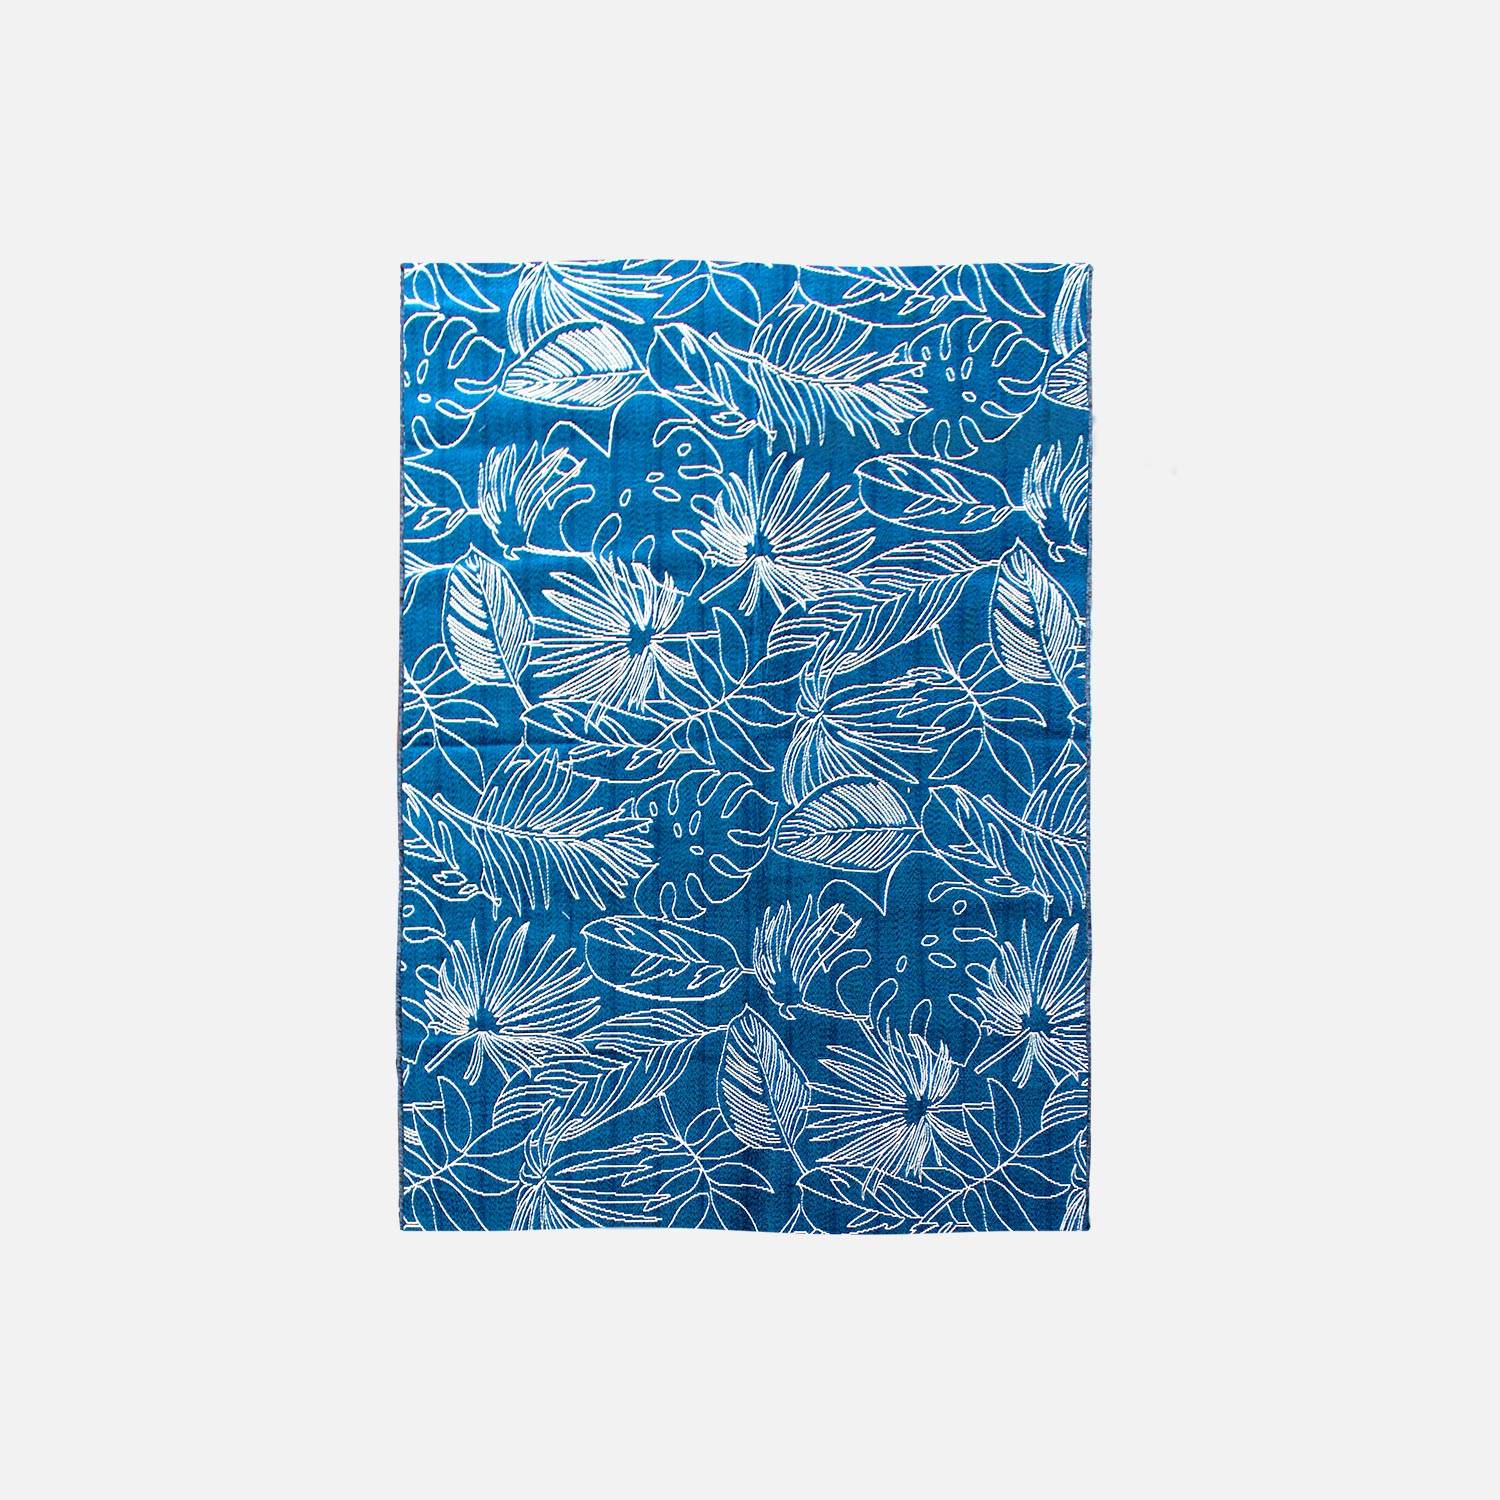 Outdoor rug - 160x230cm - rectangular, indoor/outdoor use - Exotic - Blue and white Photo1